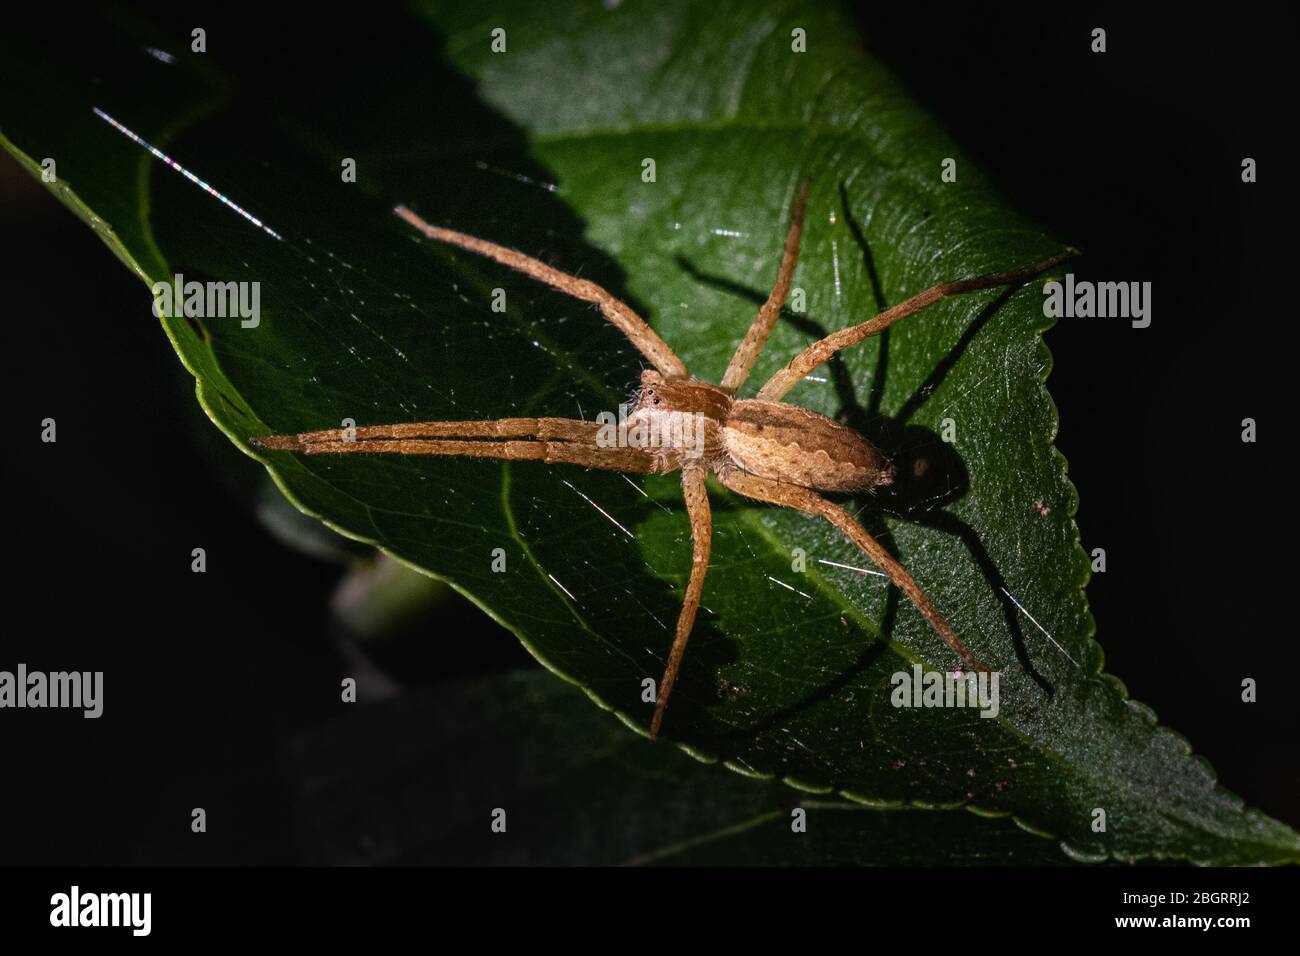 A raft water spider clings to a broad green leaf outside its comfort zone in a Pennsylvania meadow Stock Photo